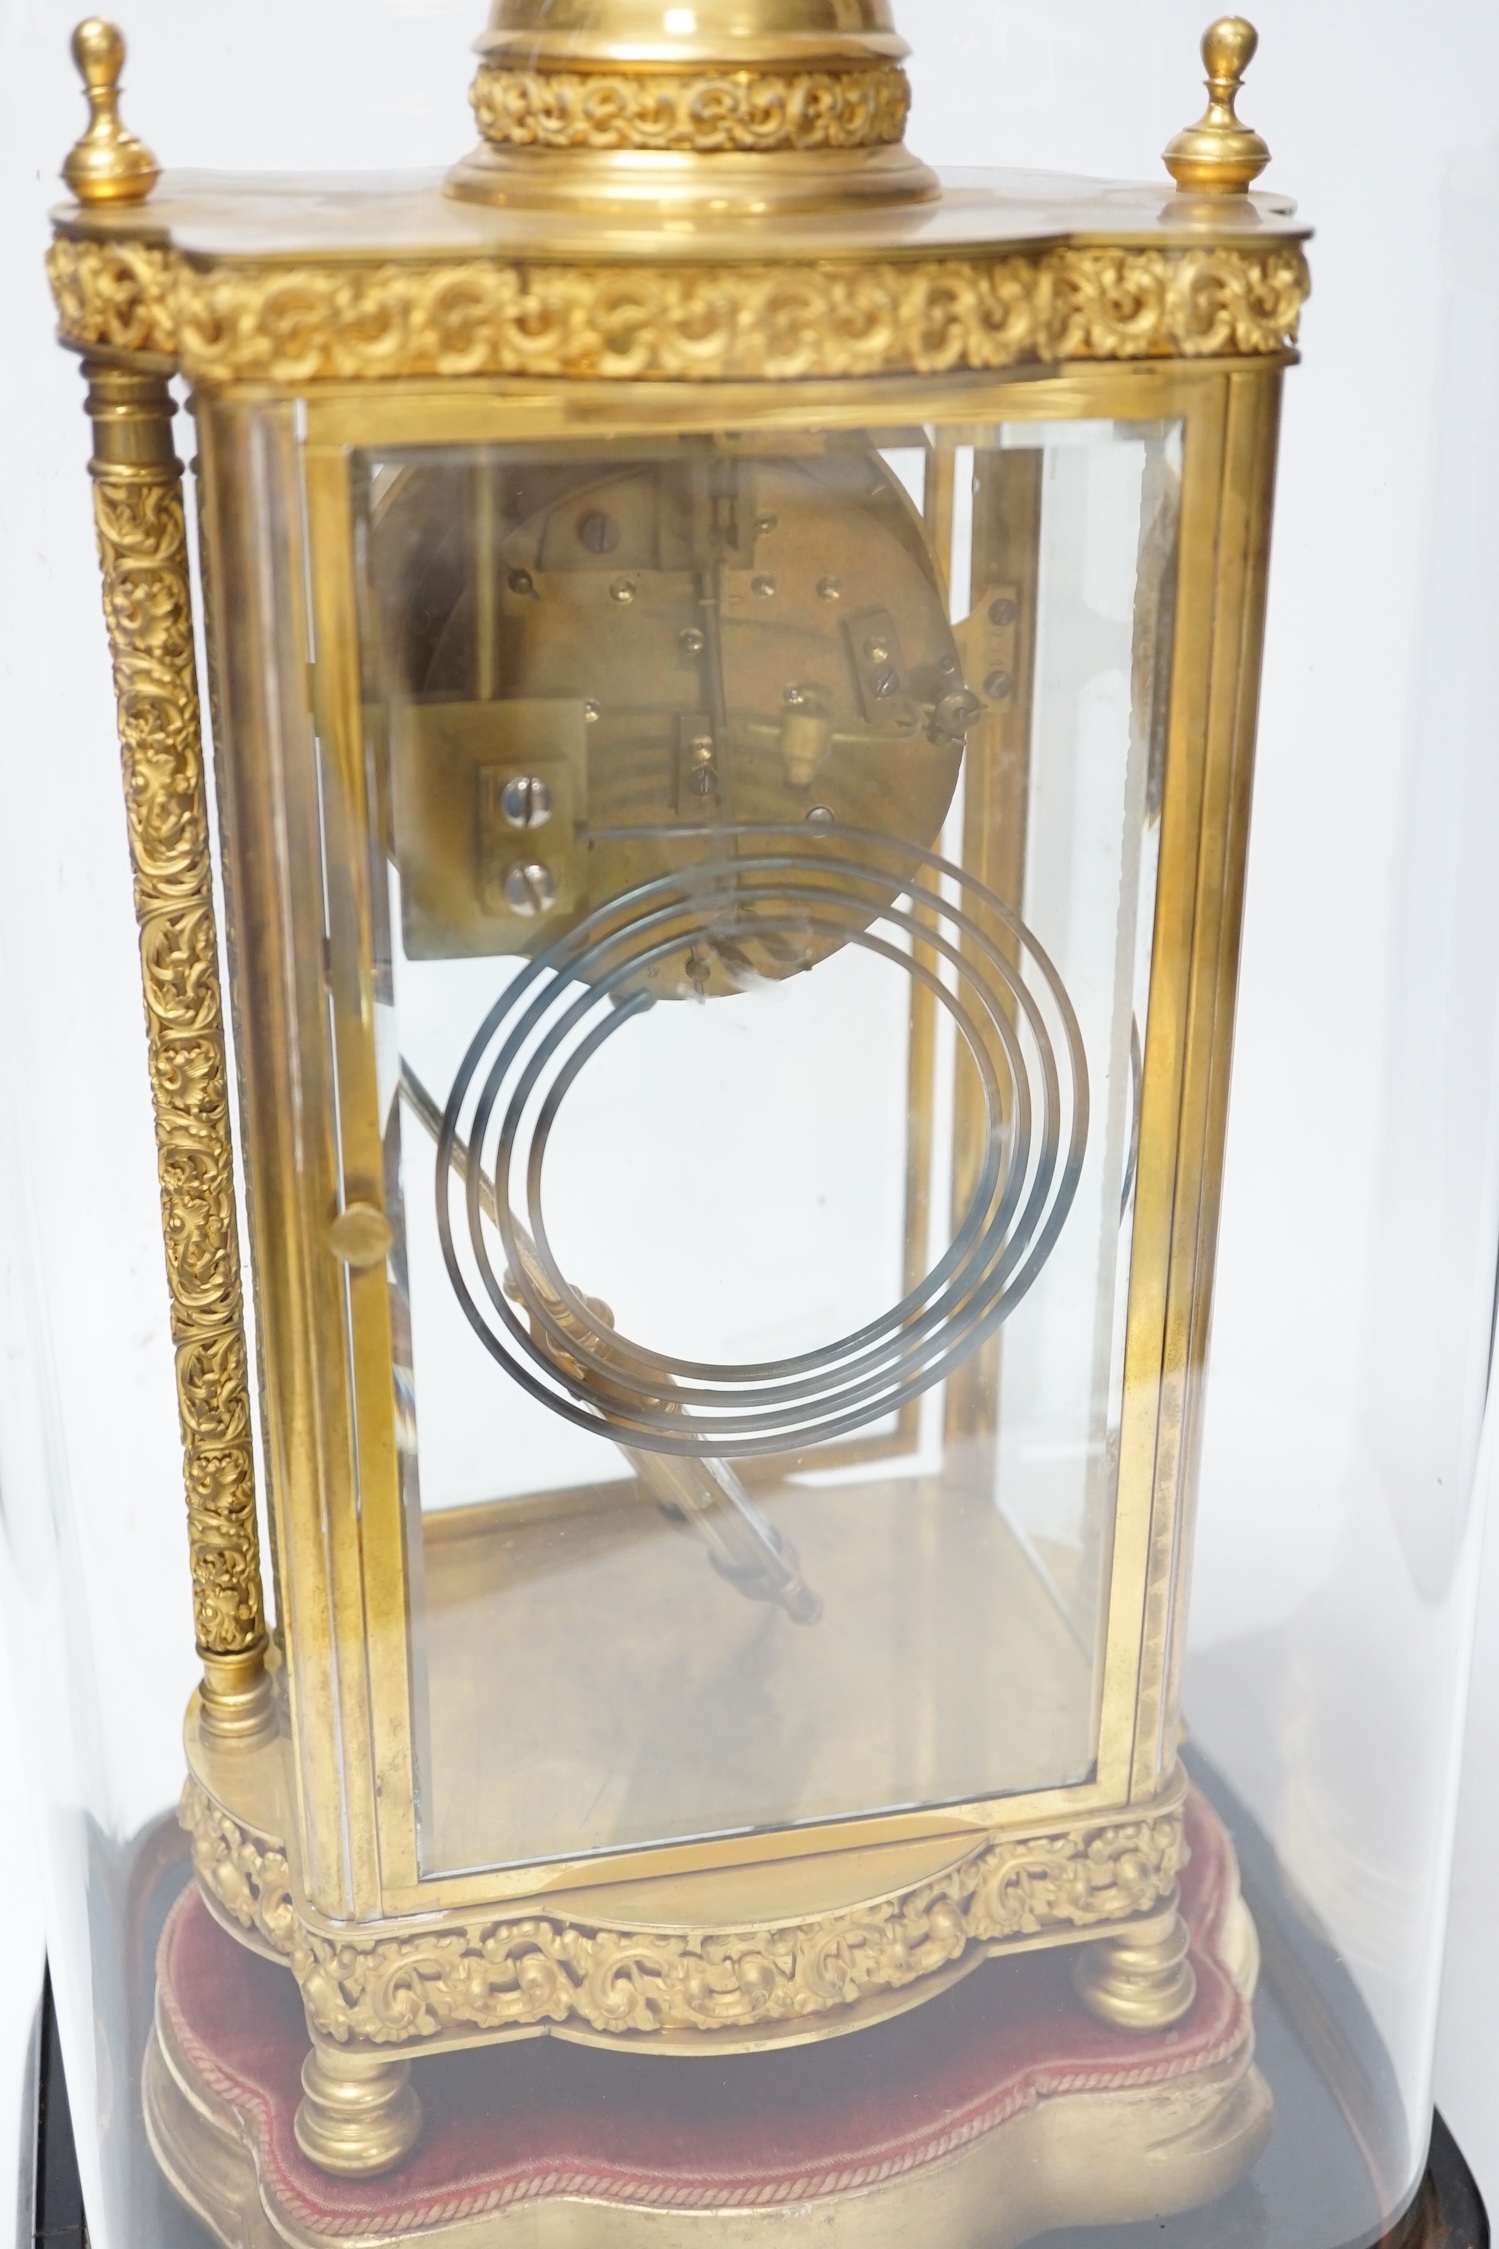 A French four glass mantel clock striking on a coiled gong with gilt brass frame and mercury - Image 4 of 4